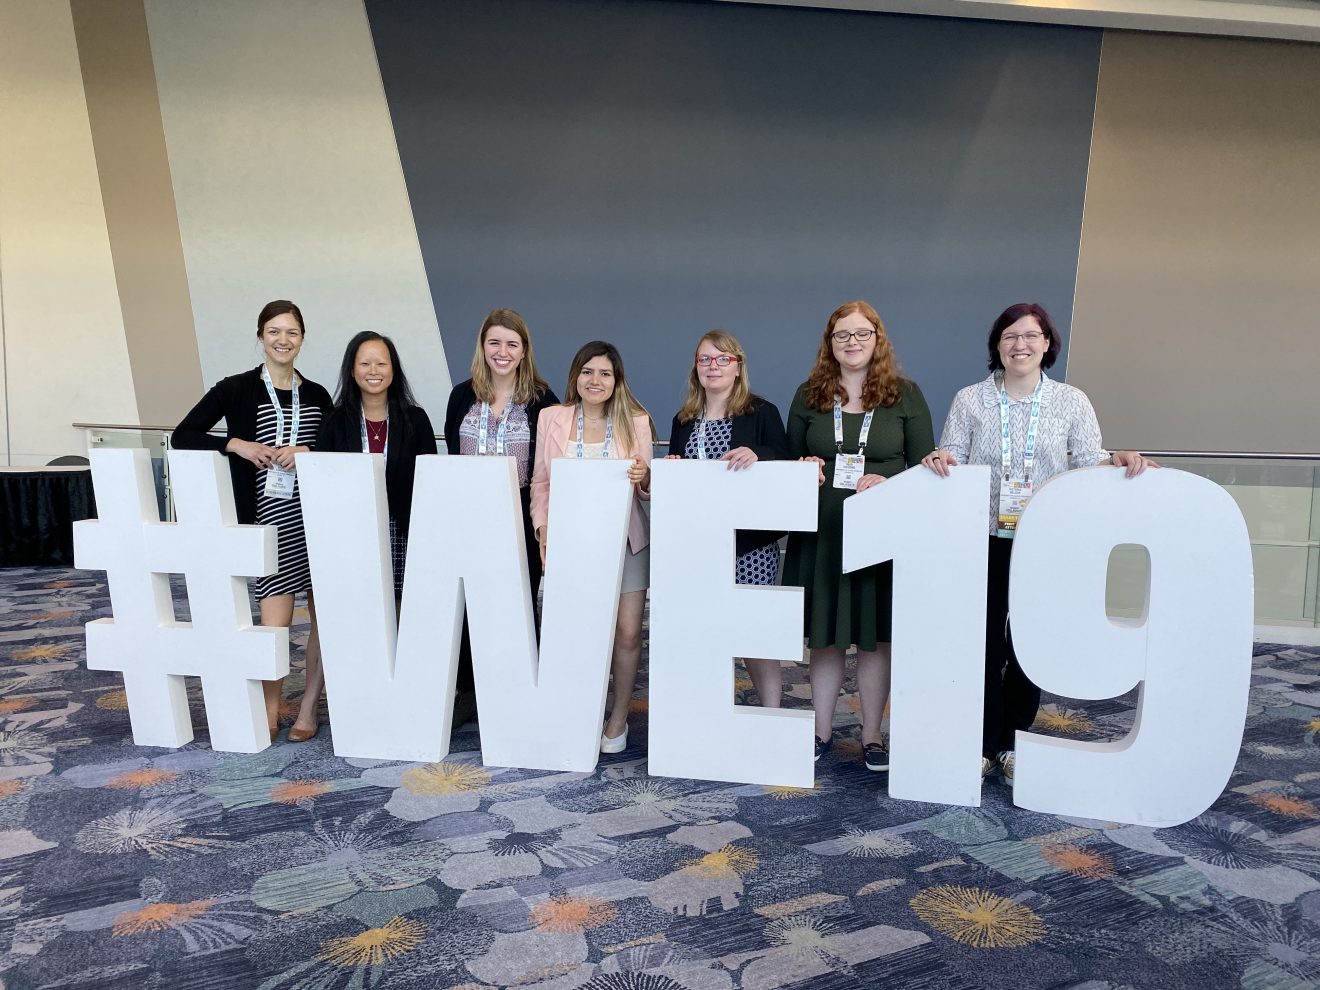 Seven women stand behind a large sign that reads "#WE19"